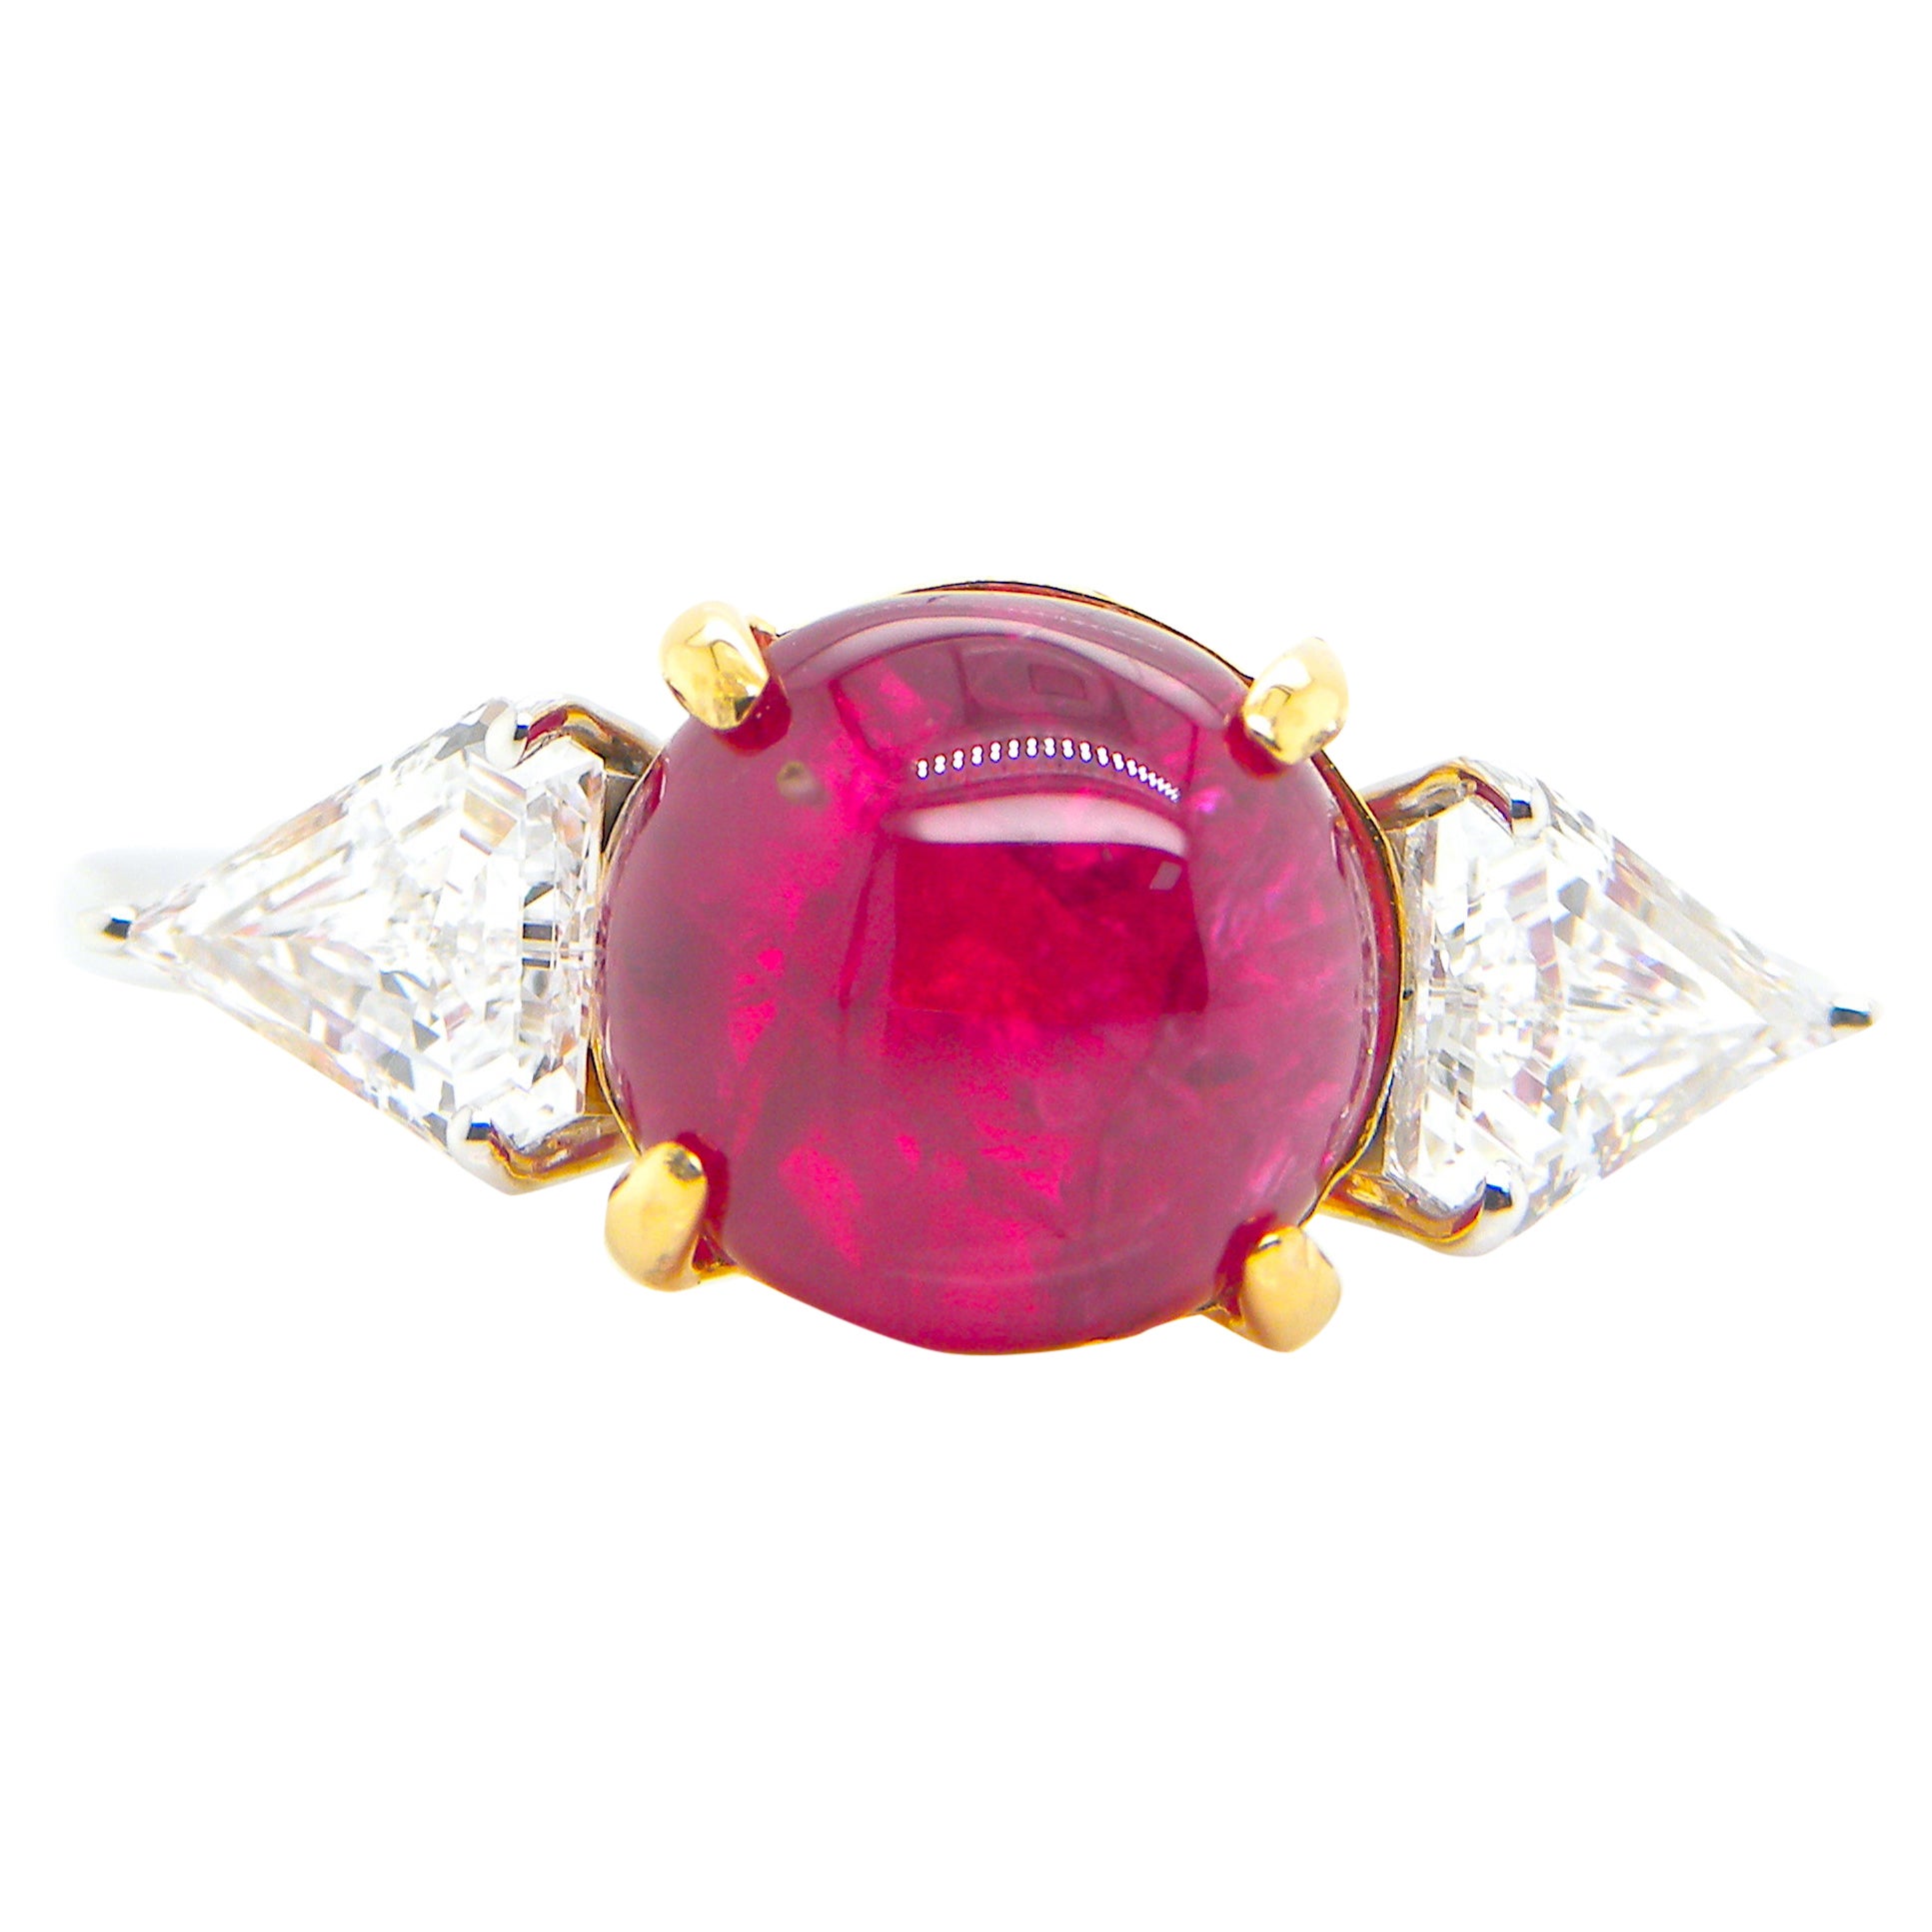 4.81 Carat GIA Certified Burma No Heat Vivid Red Ruby Cabochon and Diamond Ring